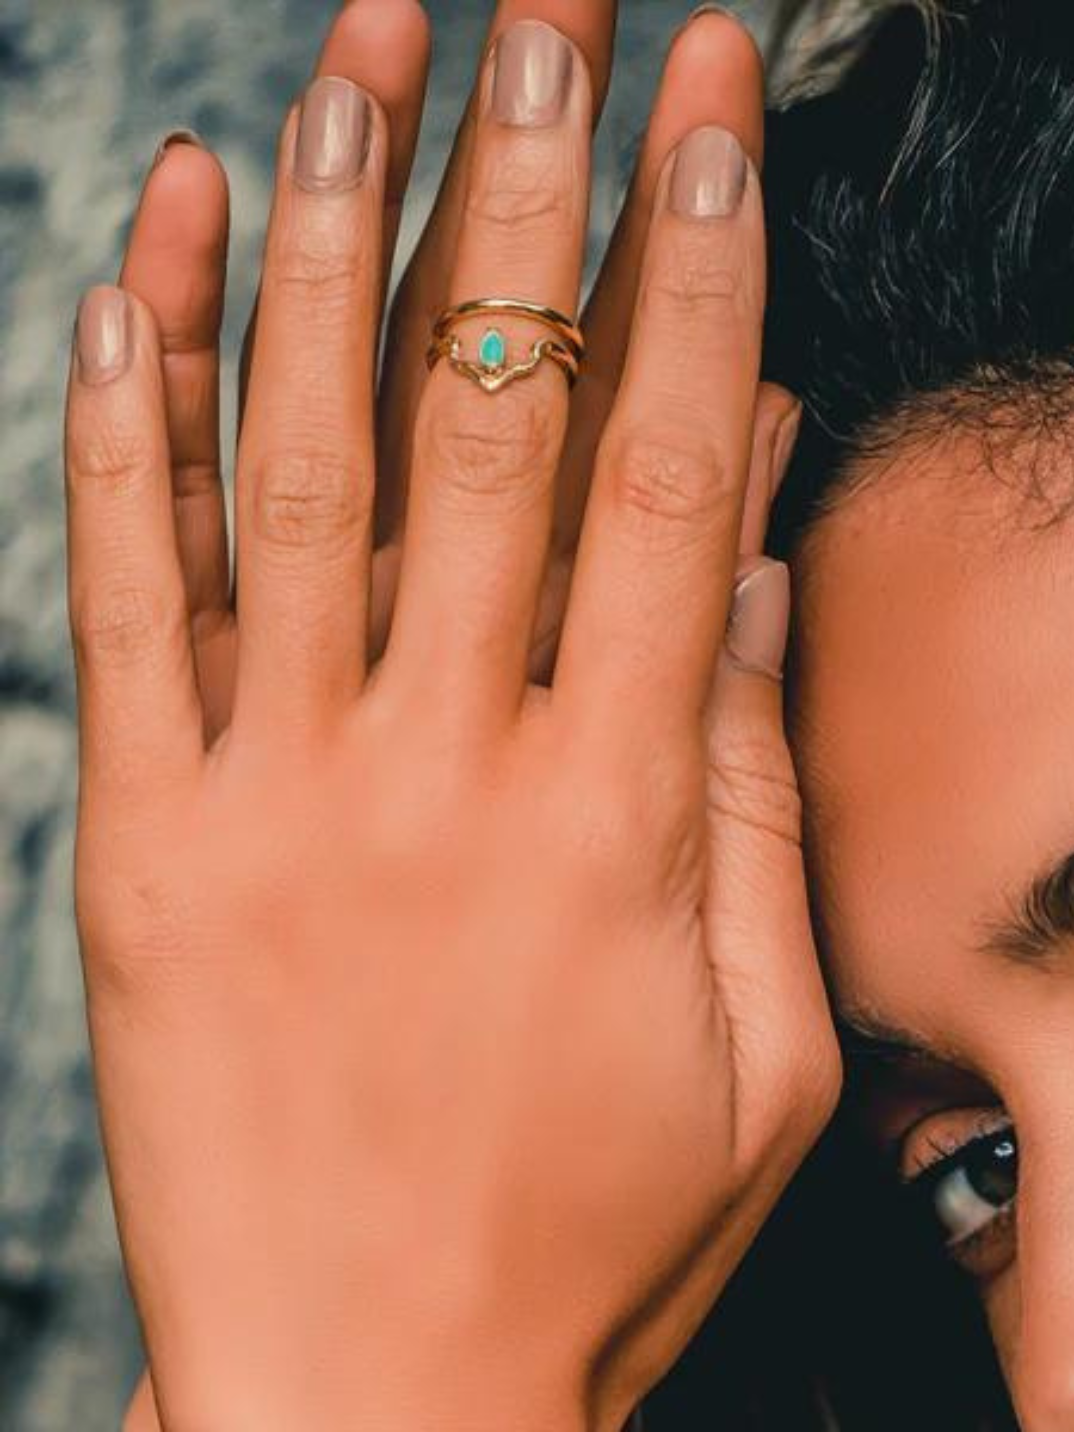 Adorn your fingers in our India Affair Chrysoprase ring inspired by the palace archways and colours of India.  Details: An apple green semi precious stone like no other, you will adore how this piece makes you feel.